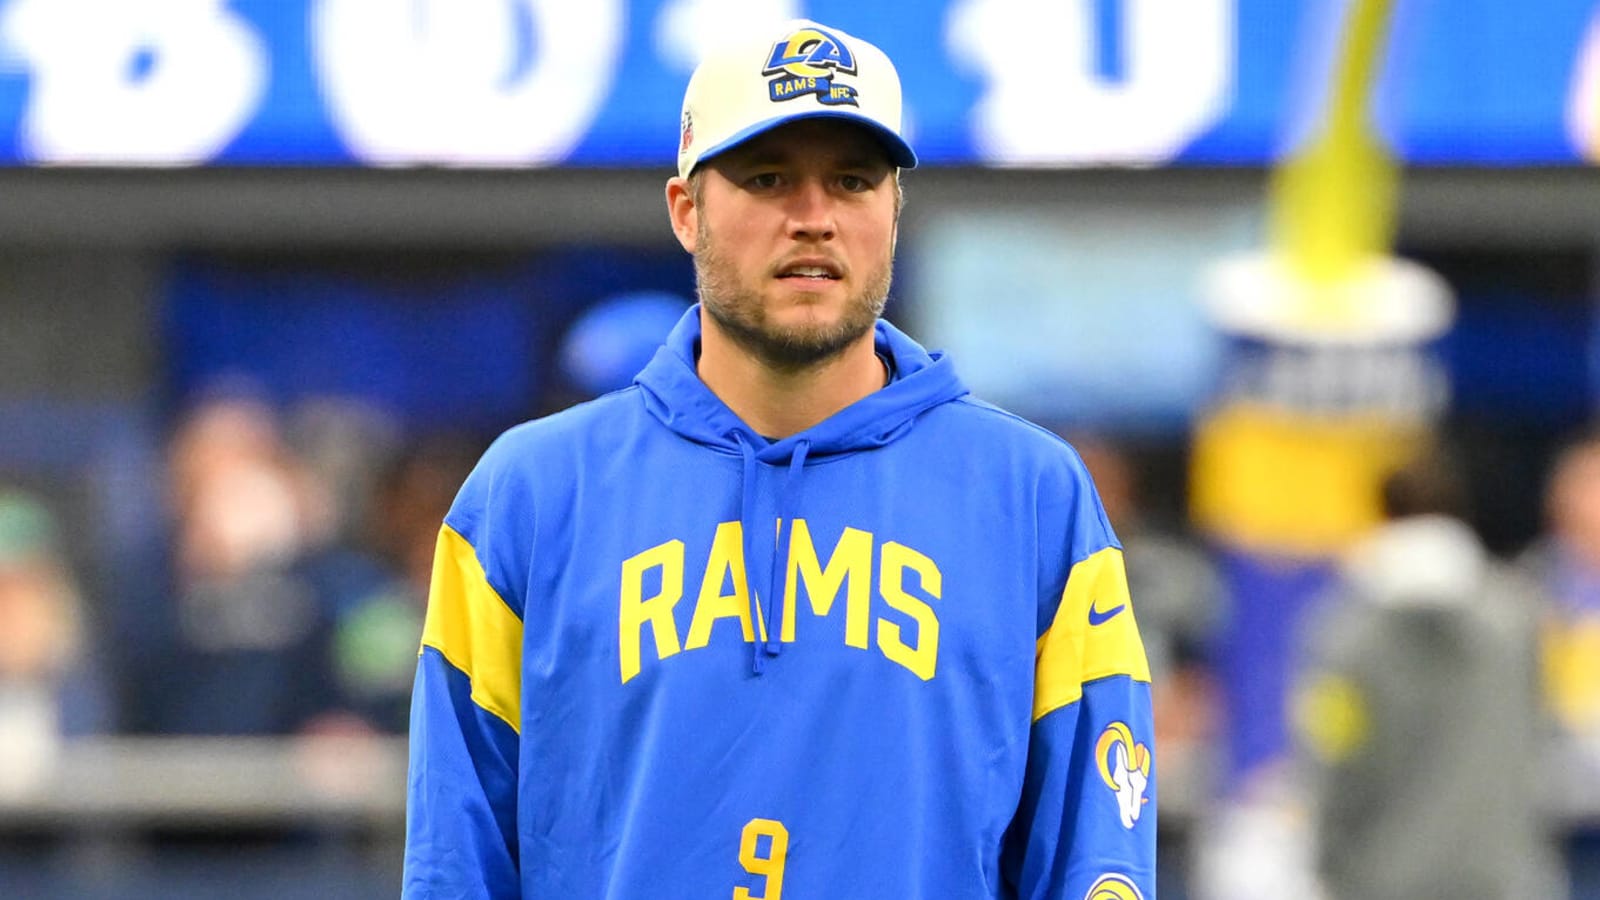 Longtime exec gives big update on Rams' Matthew Stafford